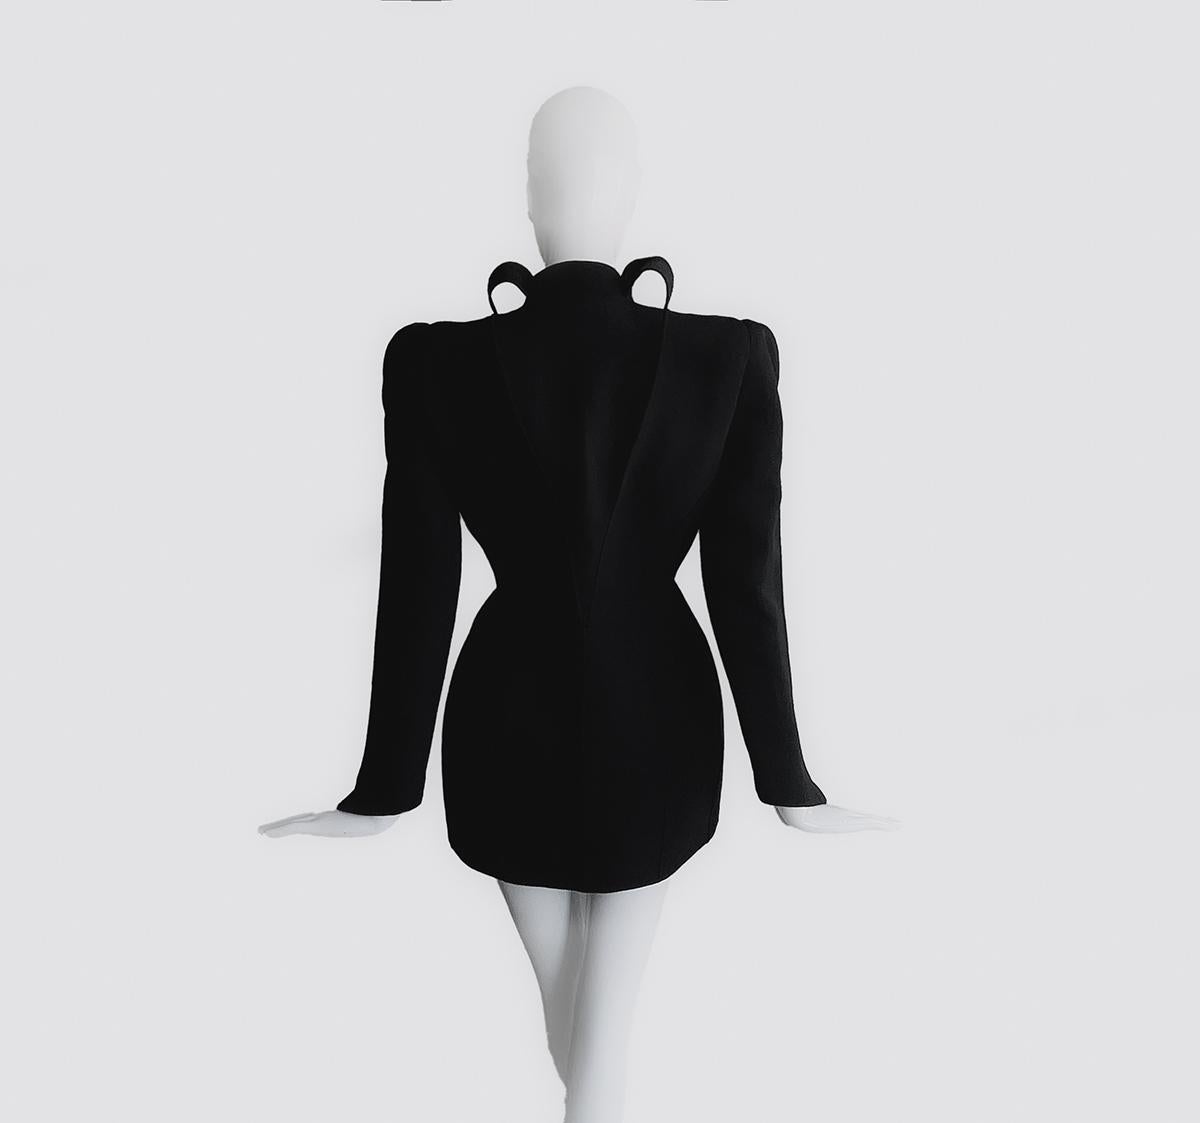 Iconic Thierry Mugler LES INFERNALES FW 1988 Dramatic Black Suit Ensemble For Sale 4